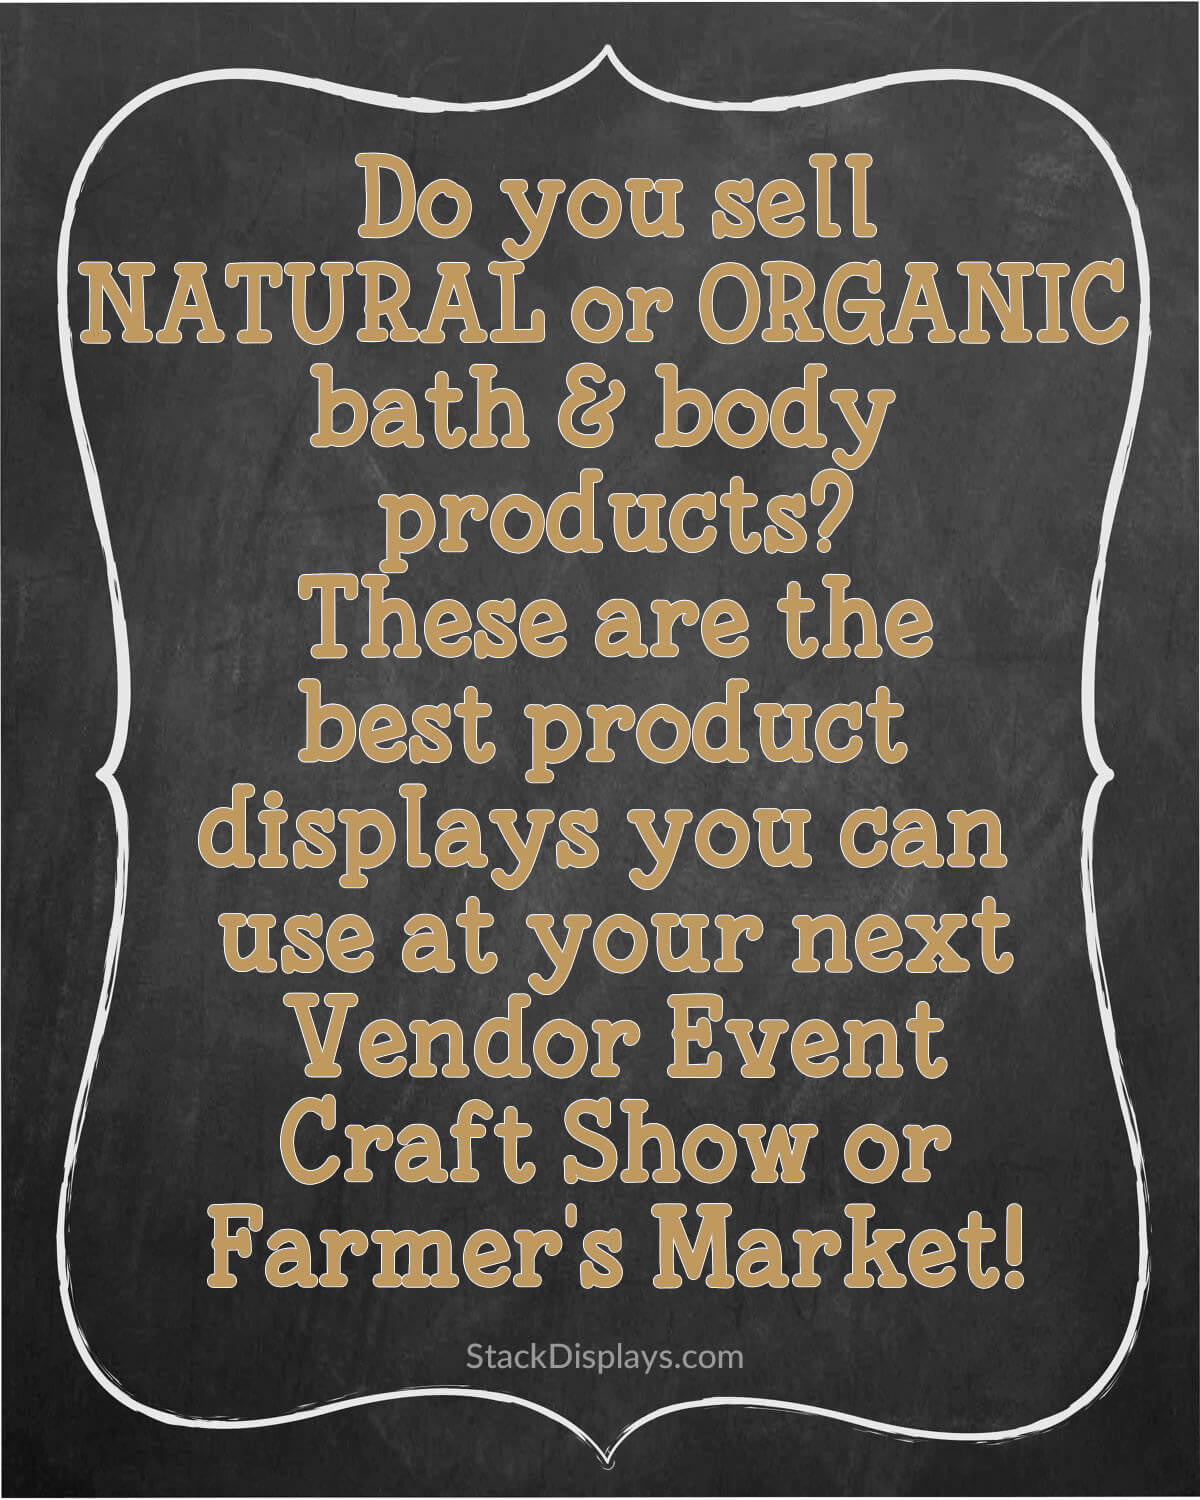 The Best Type of Displays to Use at Vendor Events & Craft Shows for Natural and Organic Products!